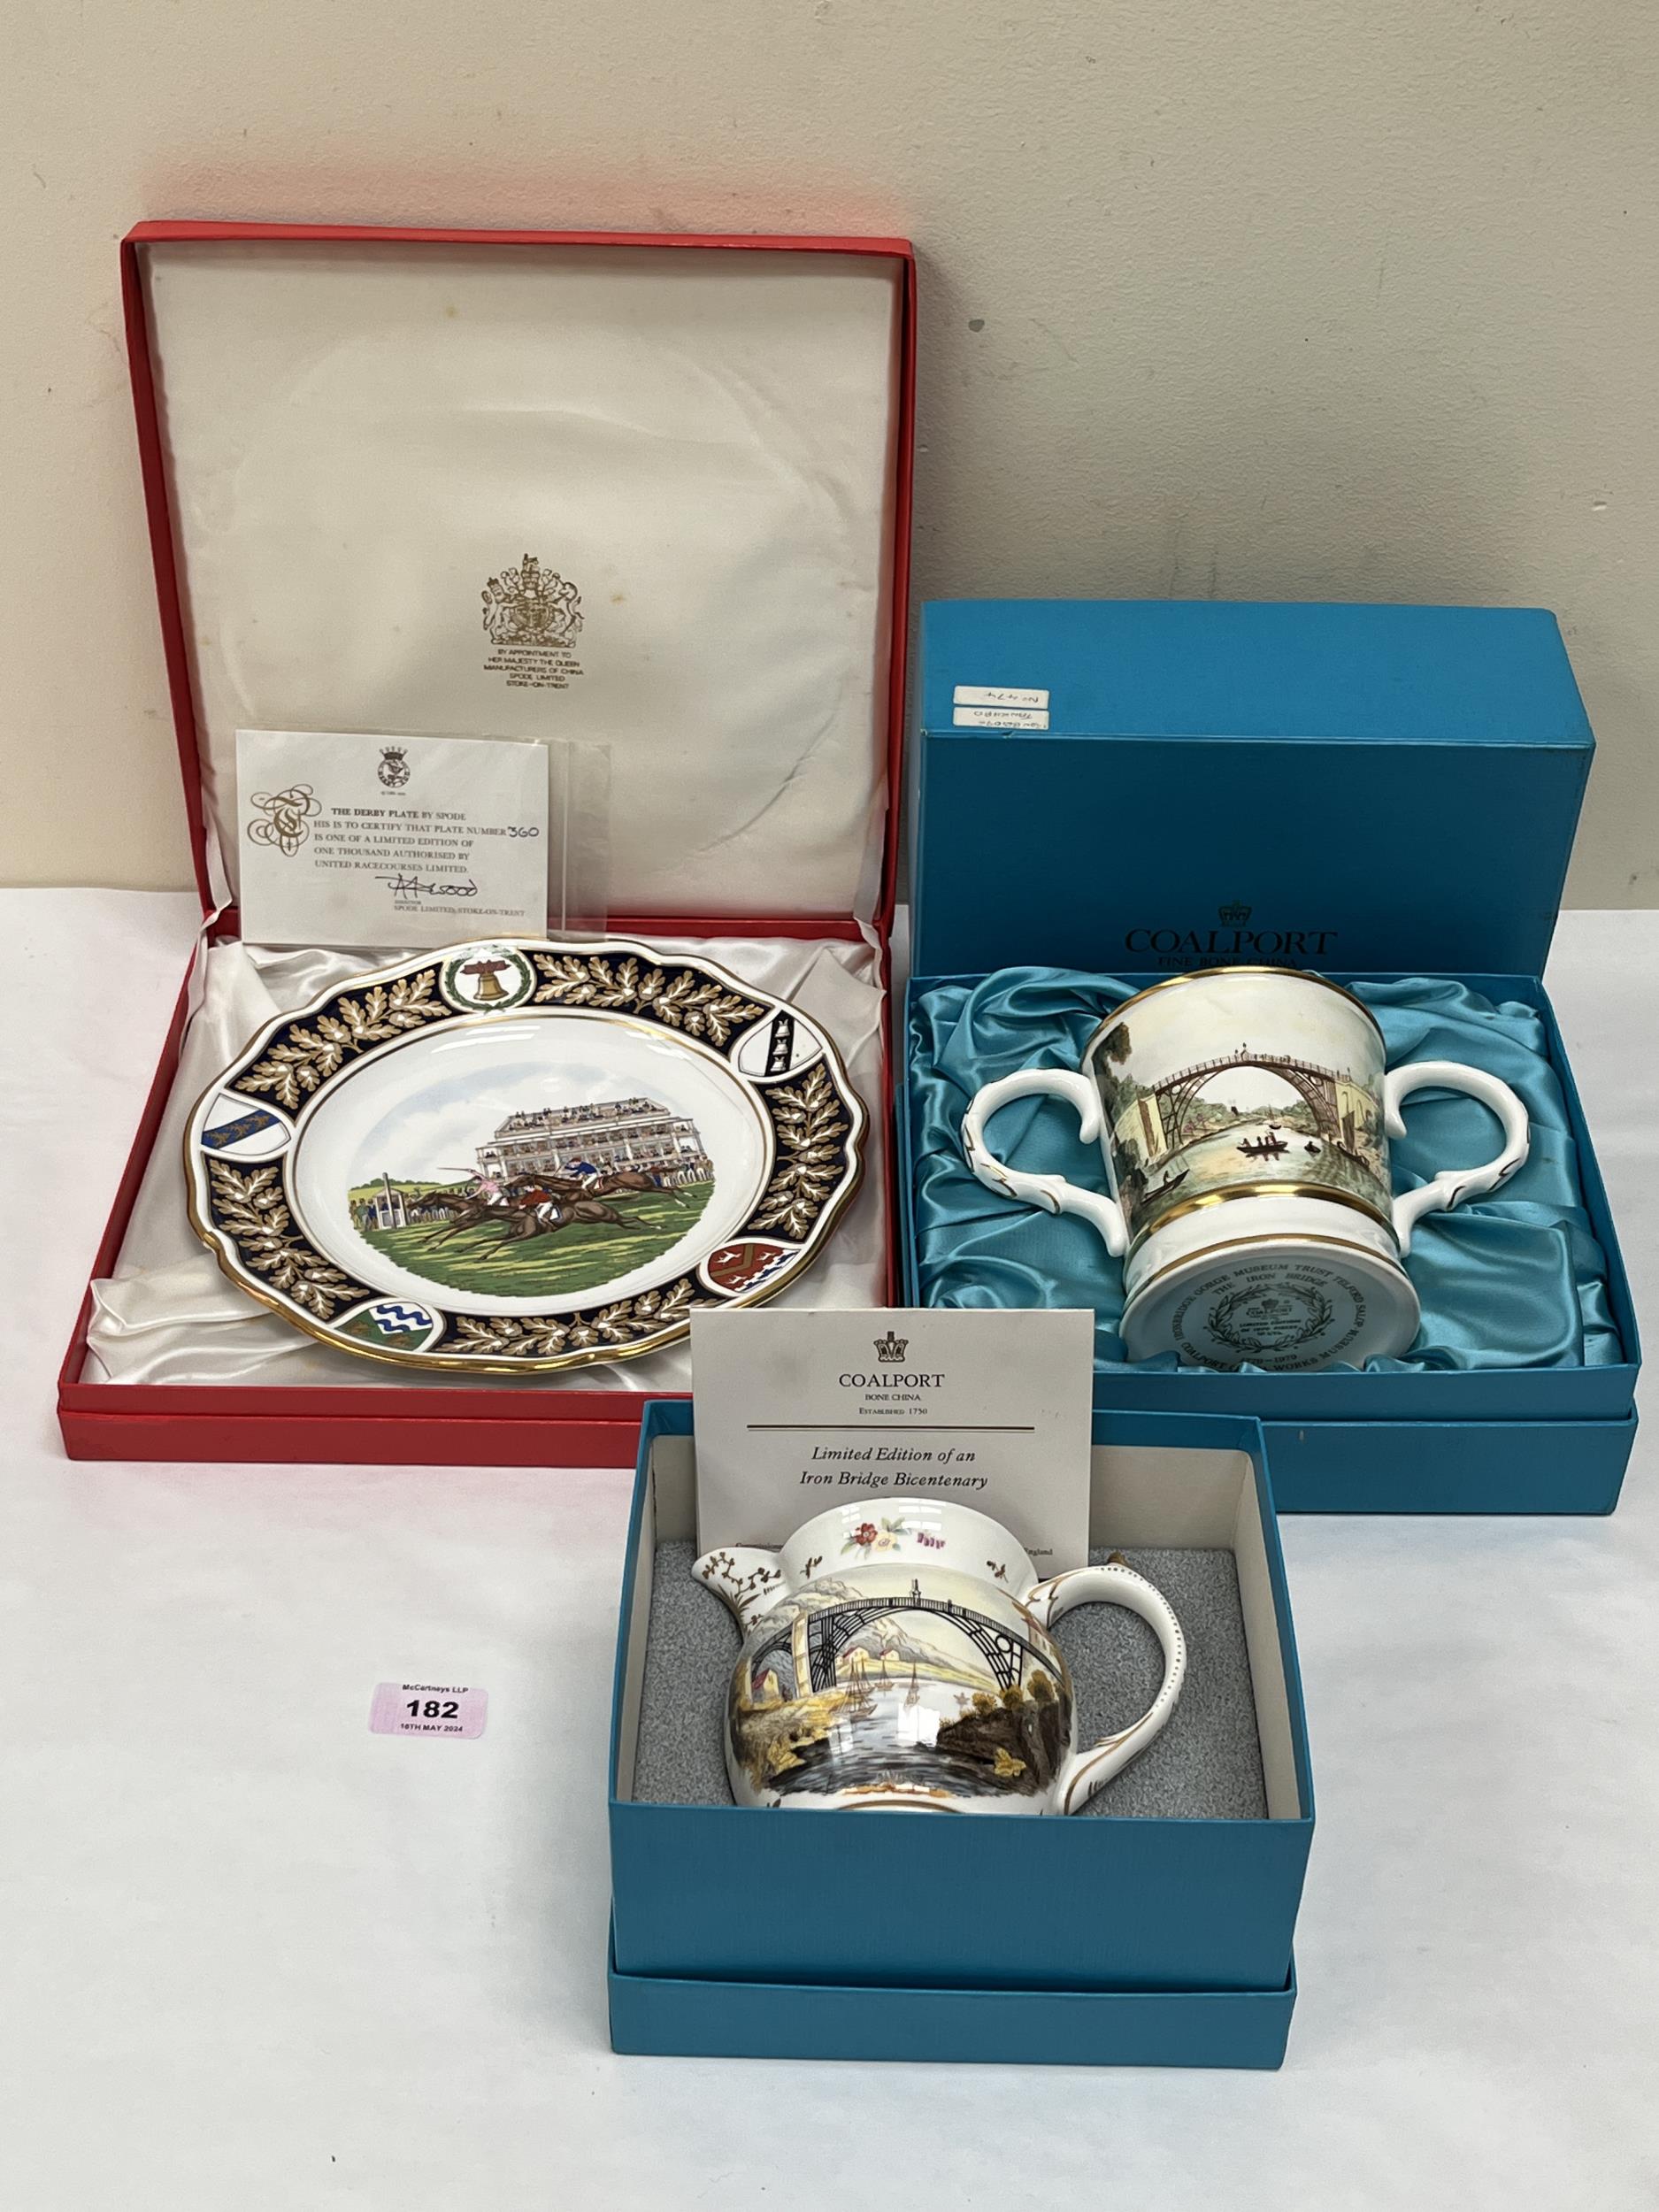 A Coalport jug and loving cup to commemorate the Iron Bridge bicentenary, both boxed, together